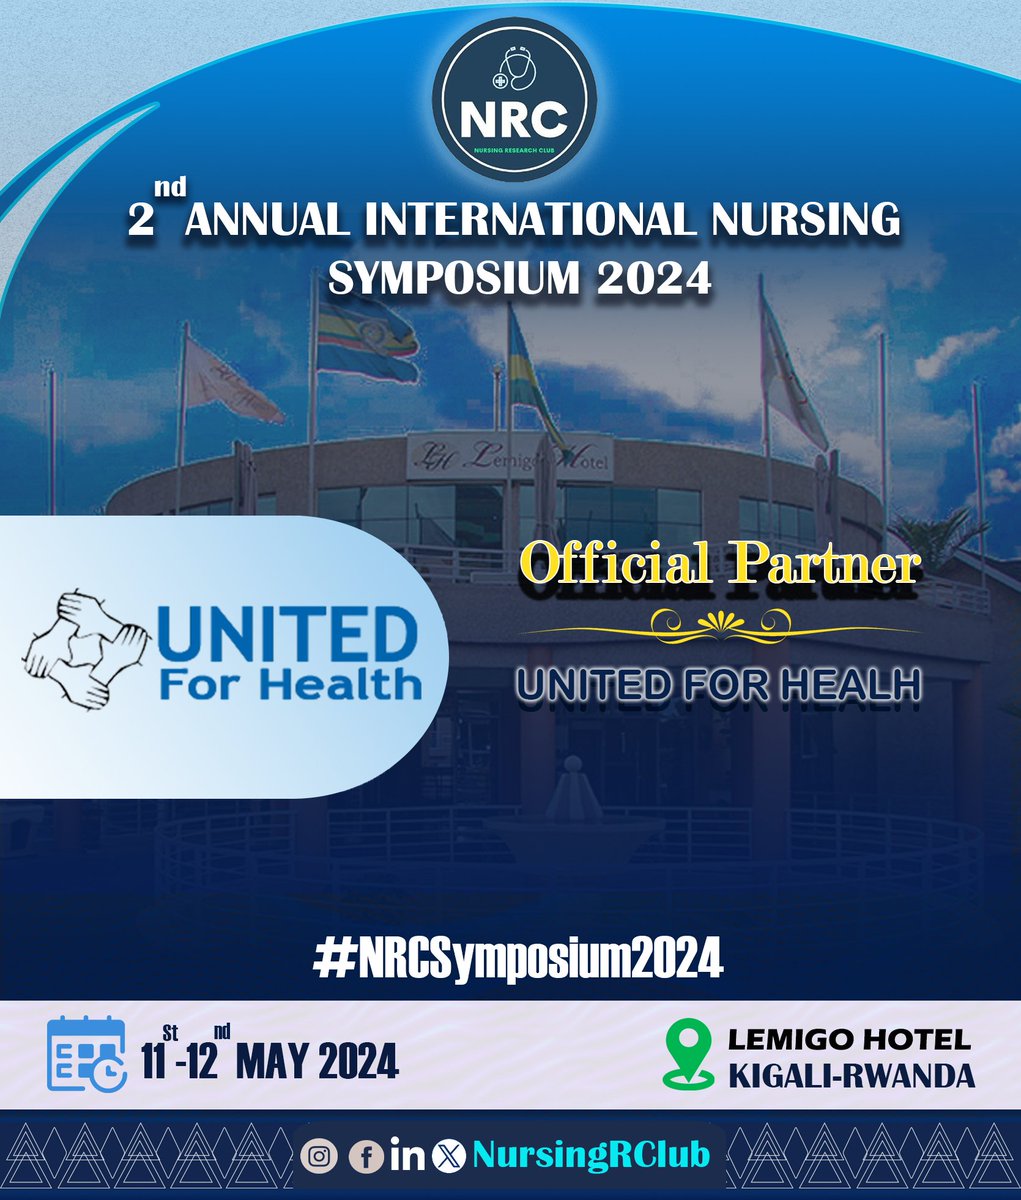 🚨 #StrongPartnership🚨 🌤️We express gratitude for the collaboration with @UnitedForHealt1 at #NRCSymposium2024.⚡ Our partnership will greatly augment the event's objective, knowledge exchange and fostering innovation within nursing 🤱 and midwifery. #InternationalNursesDay2024